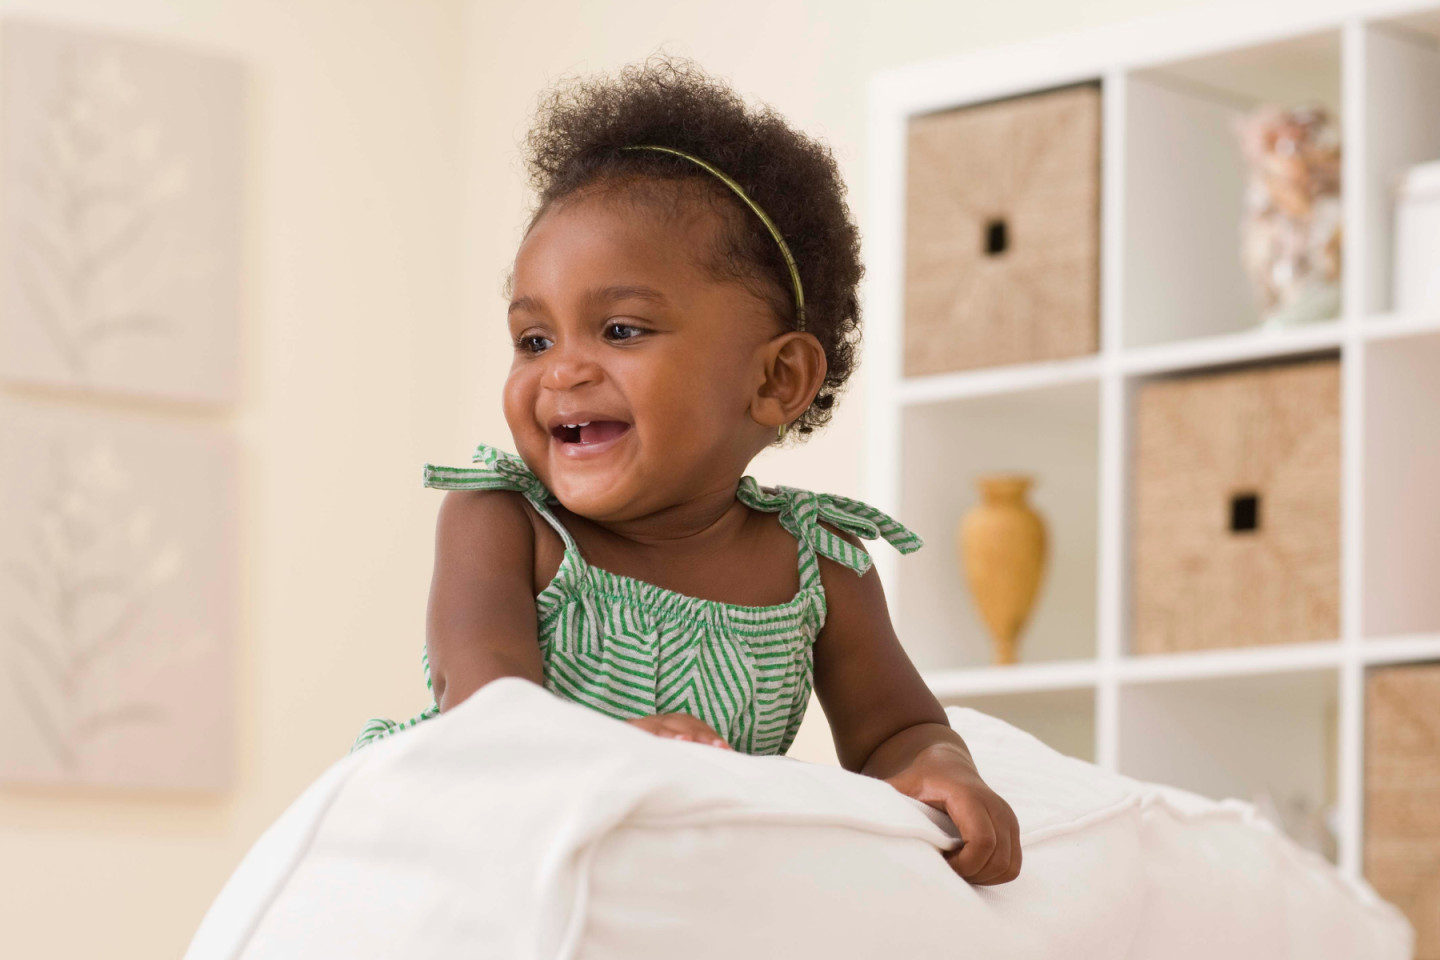 The Best Baby Sleep Schedule: When and How to Incorporate It